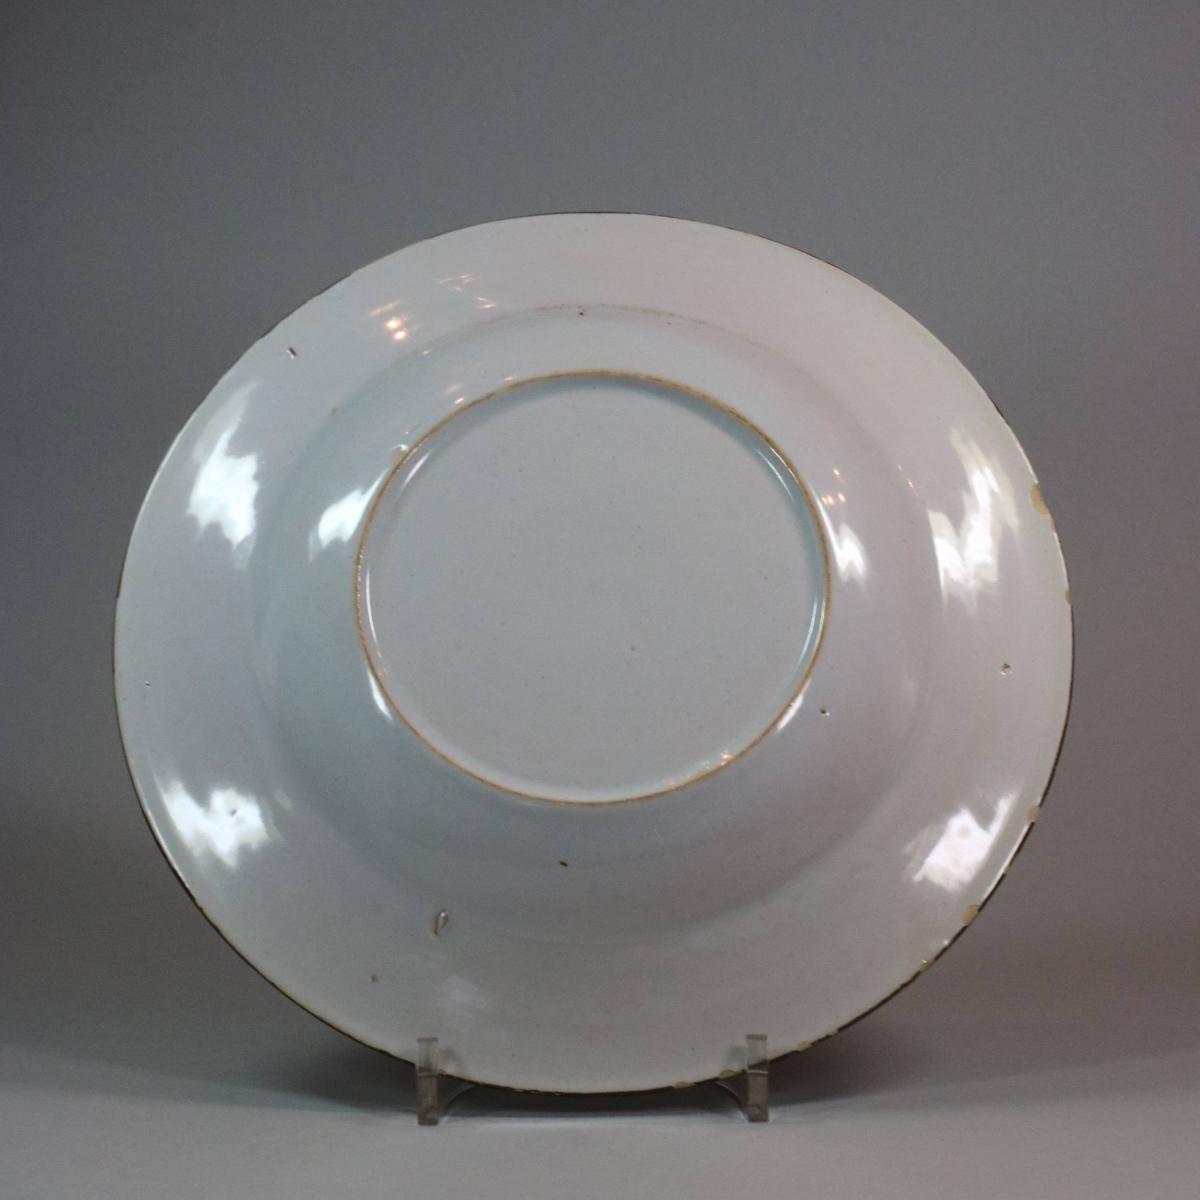 Reverse of Faenza soup plate